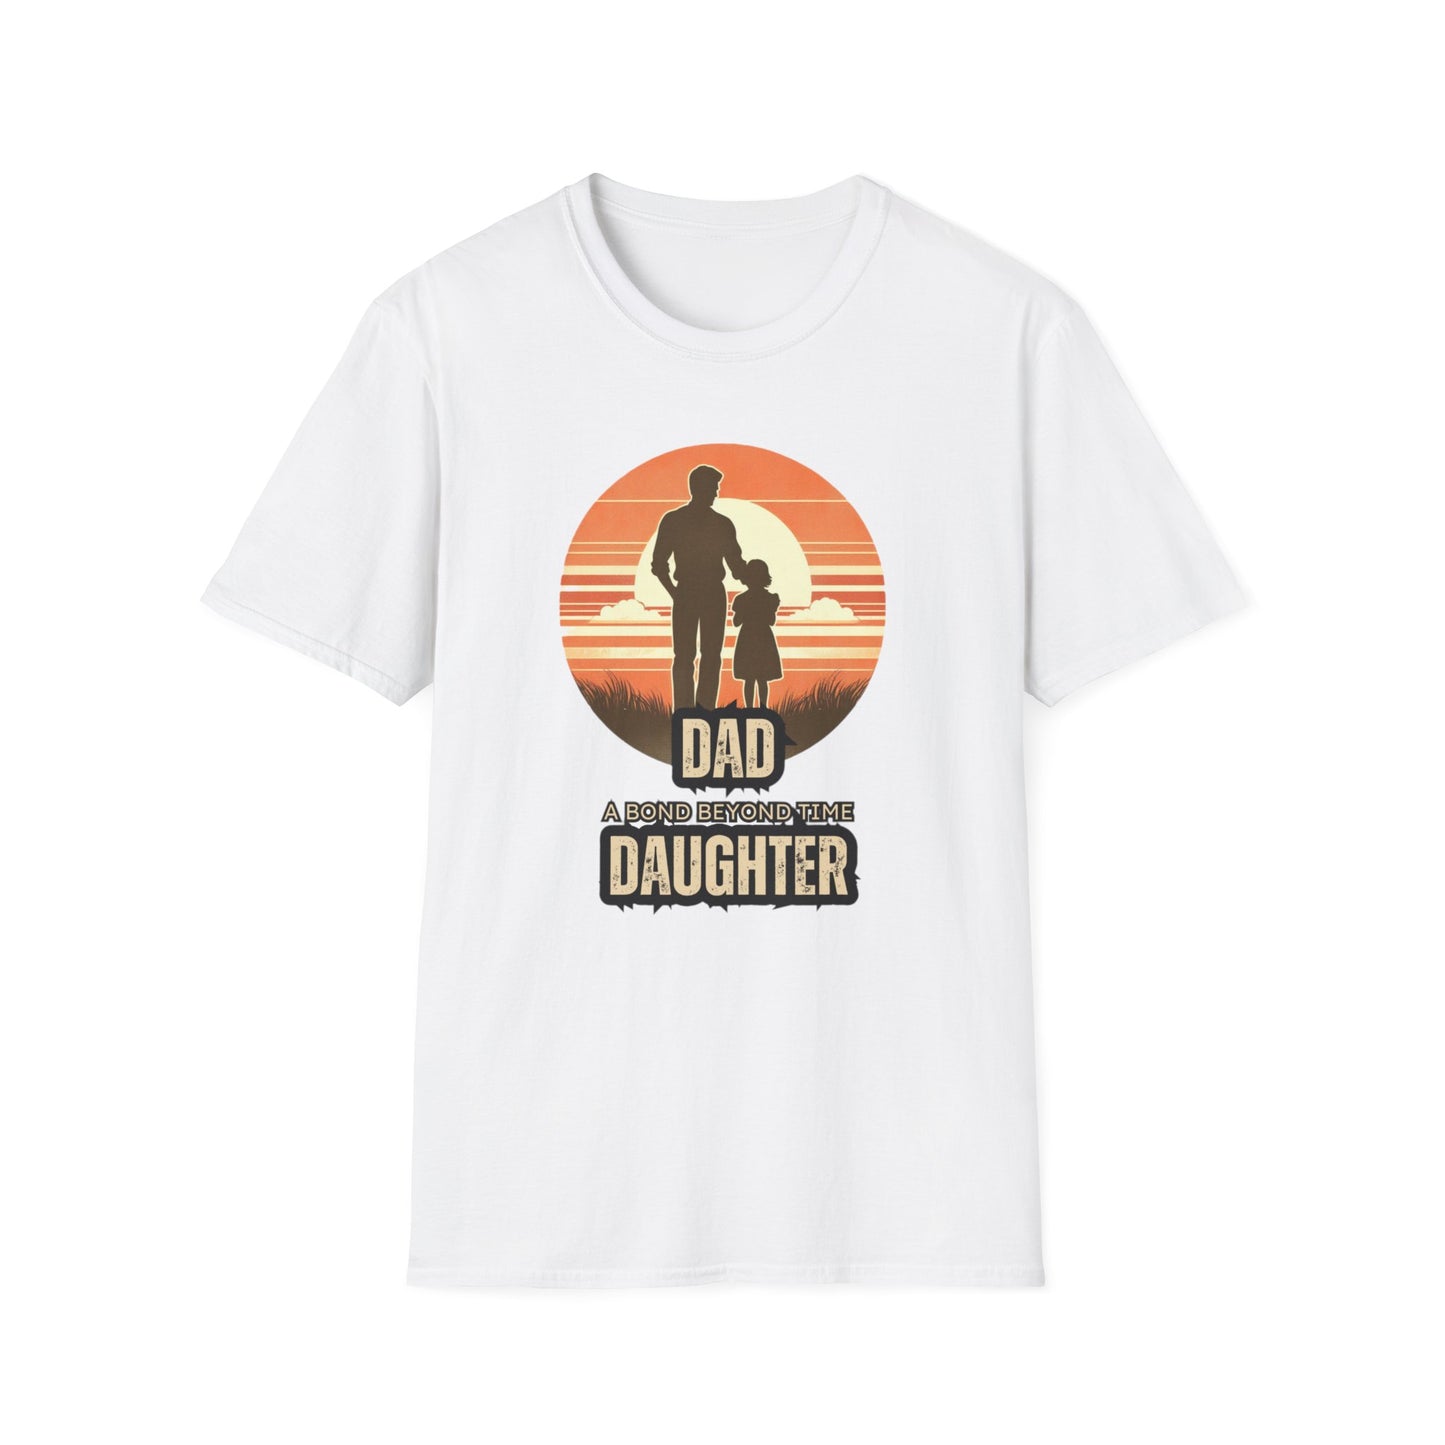 Dad & Daughter: A Bond Beyond Time - Vintage Unisex Softstyle Tee for Father's Day, Birthday, Anniversary and Christmas Gift.